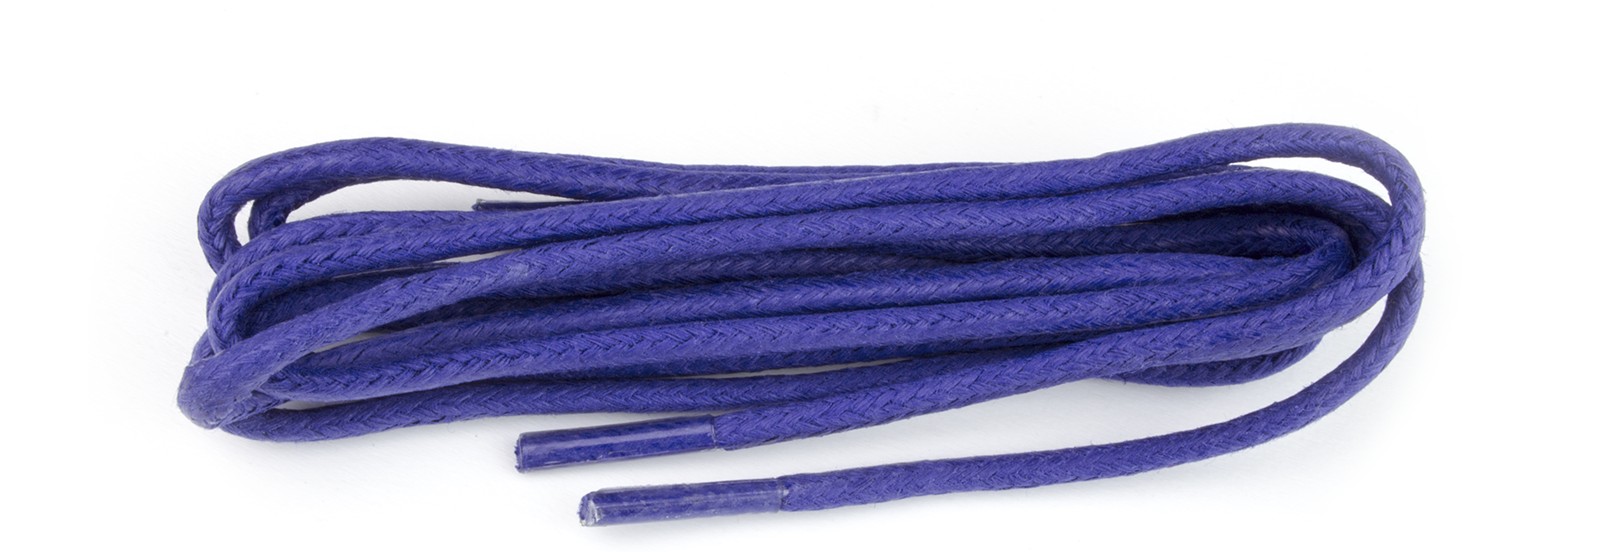 shoestring Shoe Lace Royal Blue waxed 2mm Round 75cm